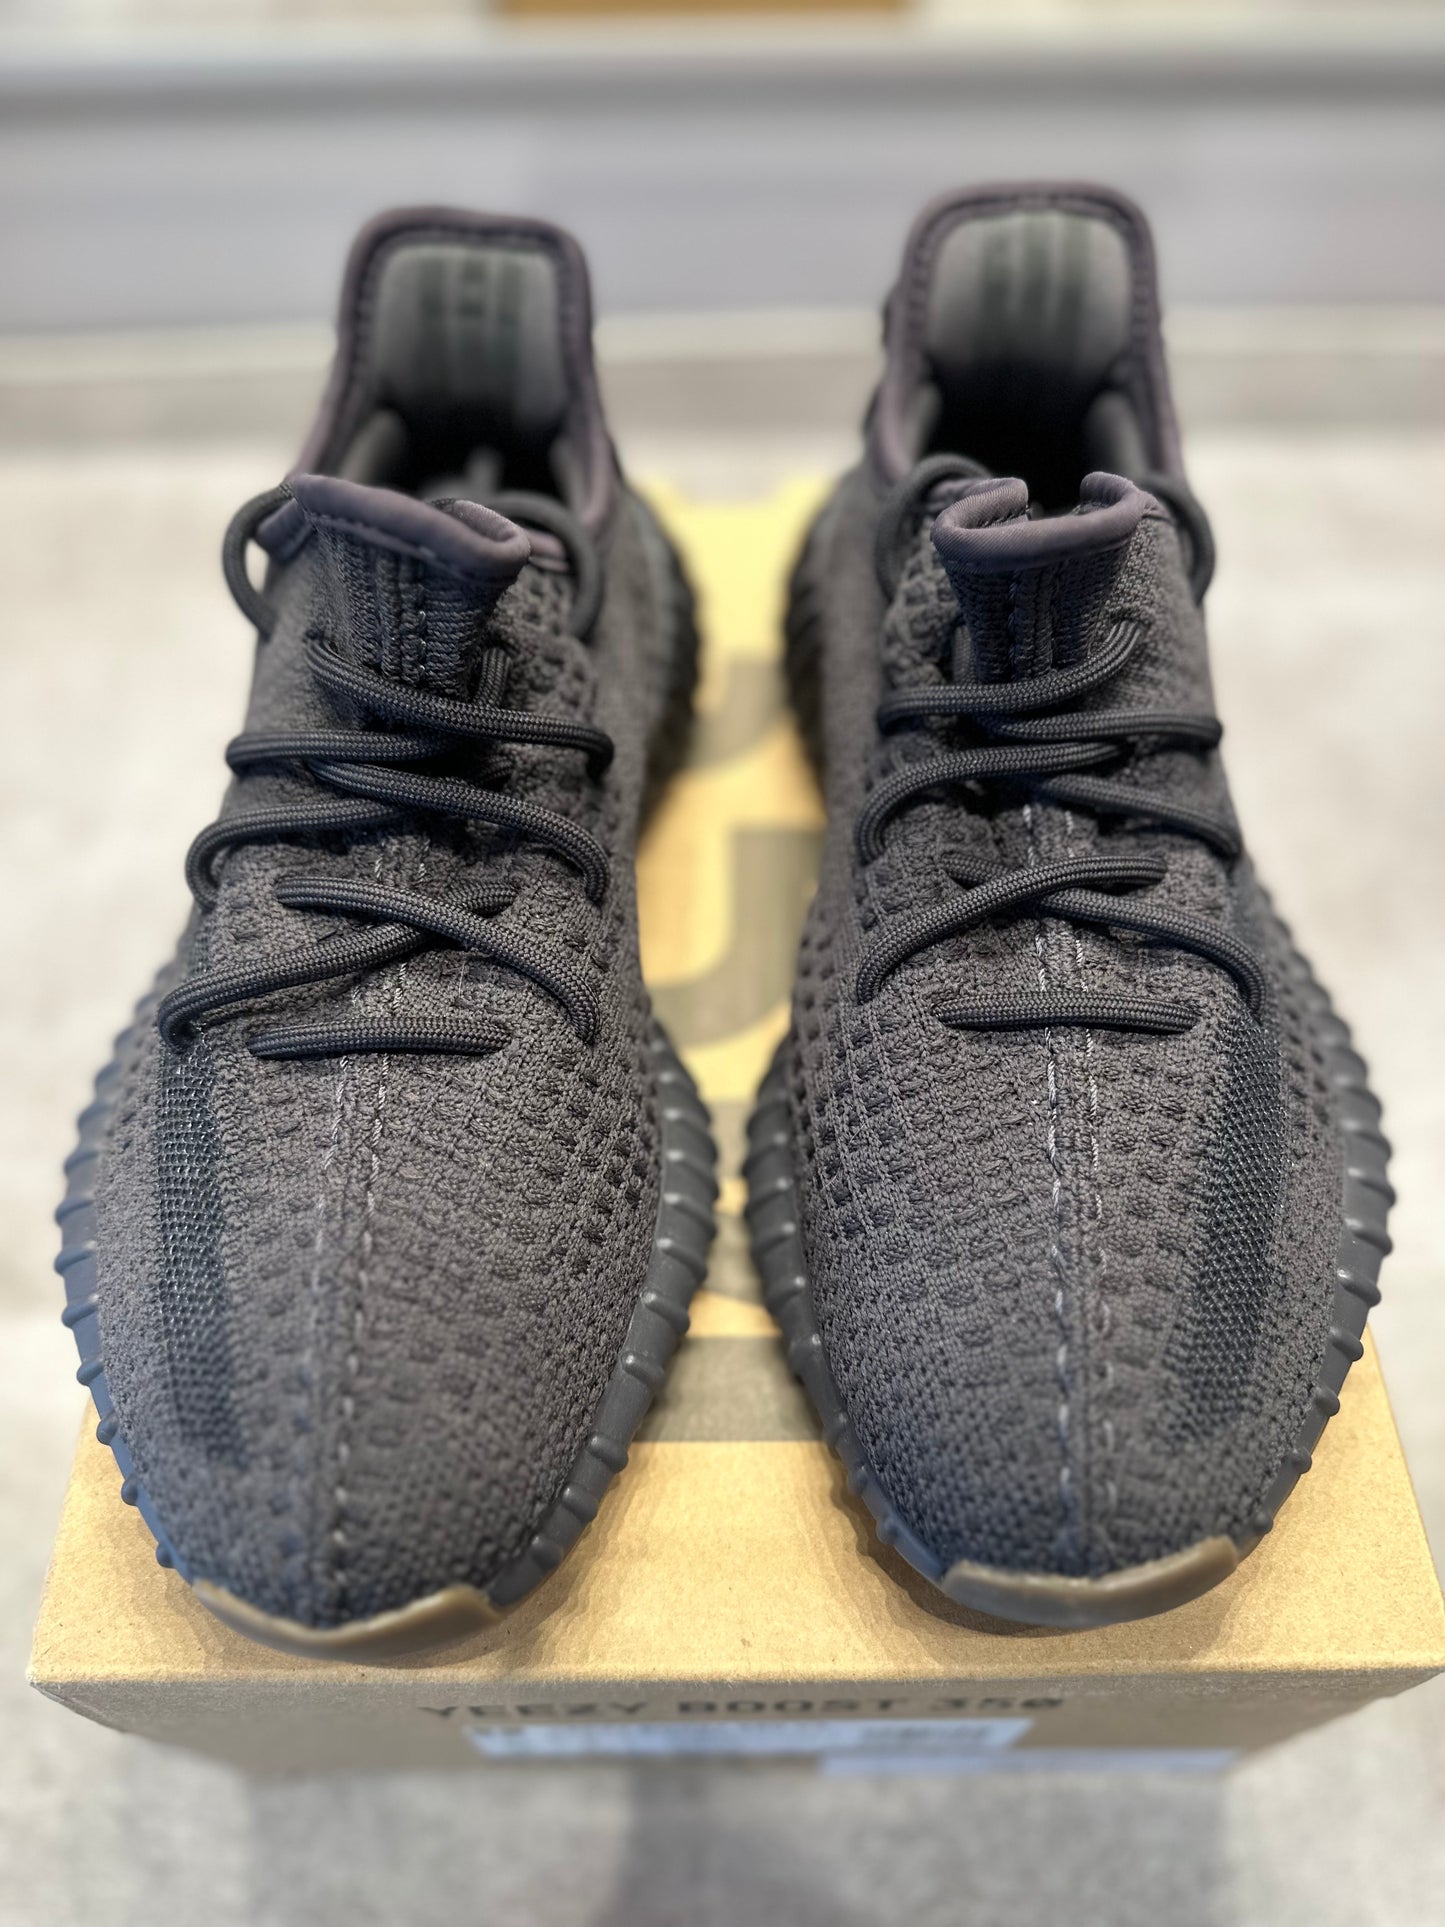 Adidas Yeezy Boost 350 V2 Cinder (Preowned Size 5.5)